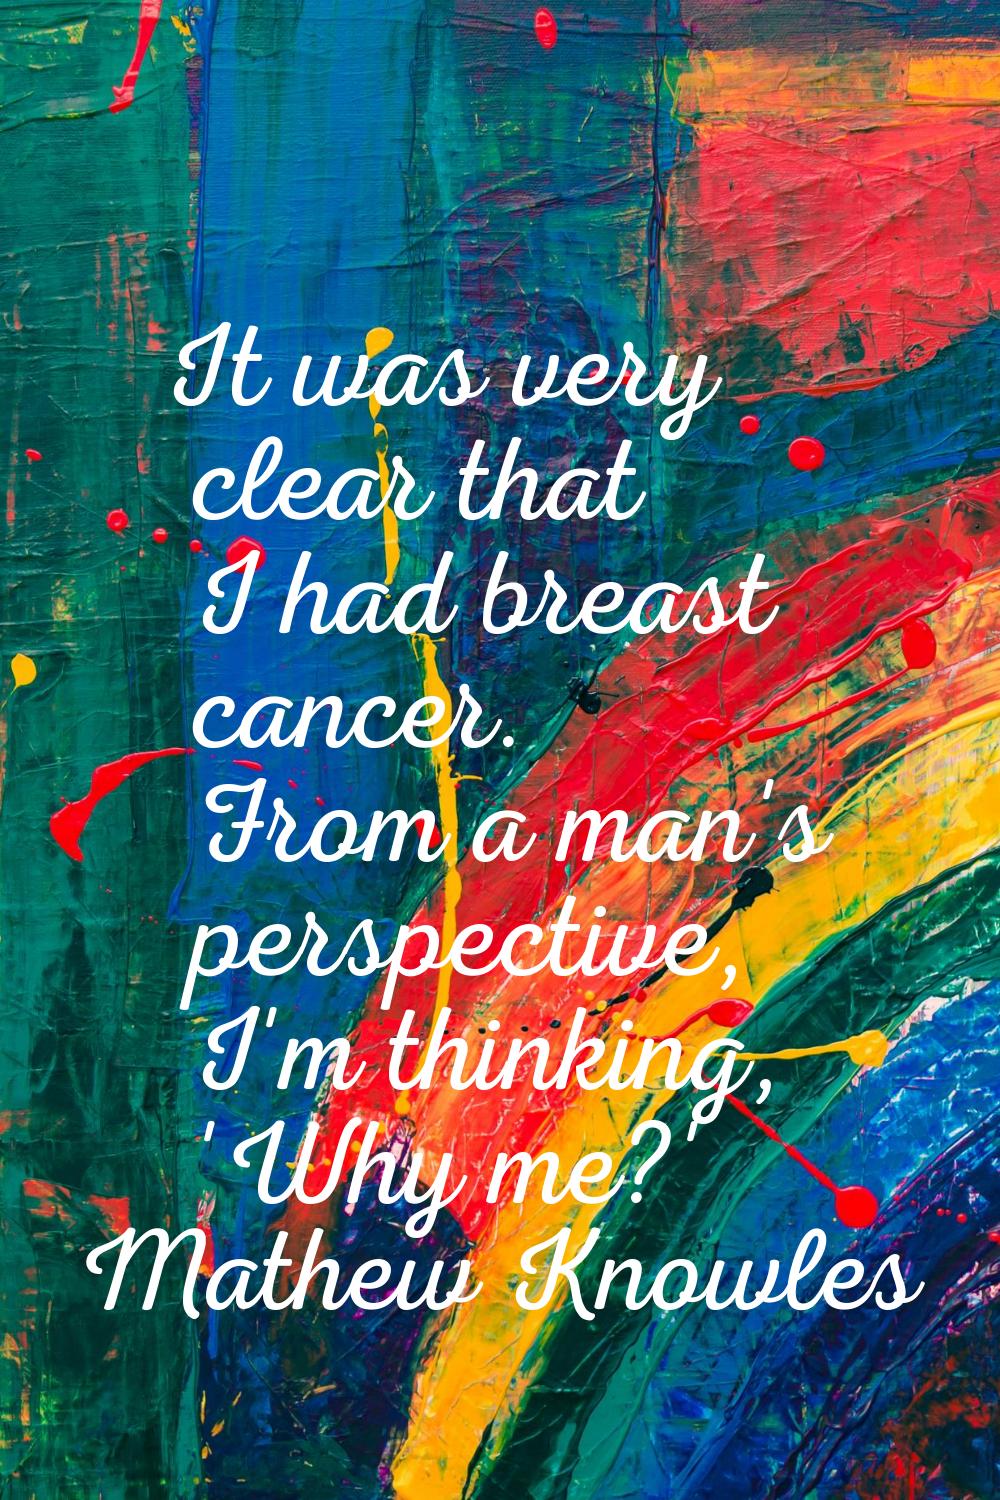 It was very clear that I had breast cancer. From a man's perspective, I'm thinking, 'Why me?'